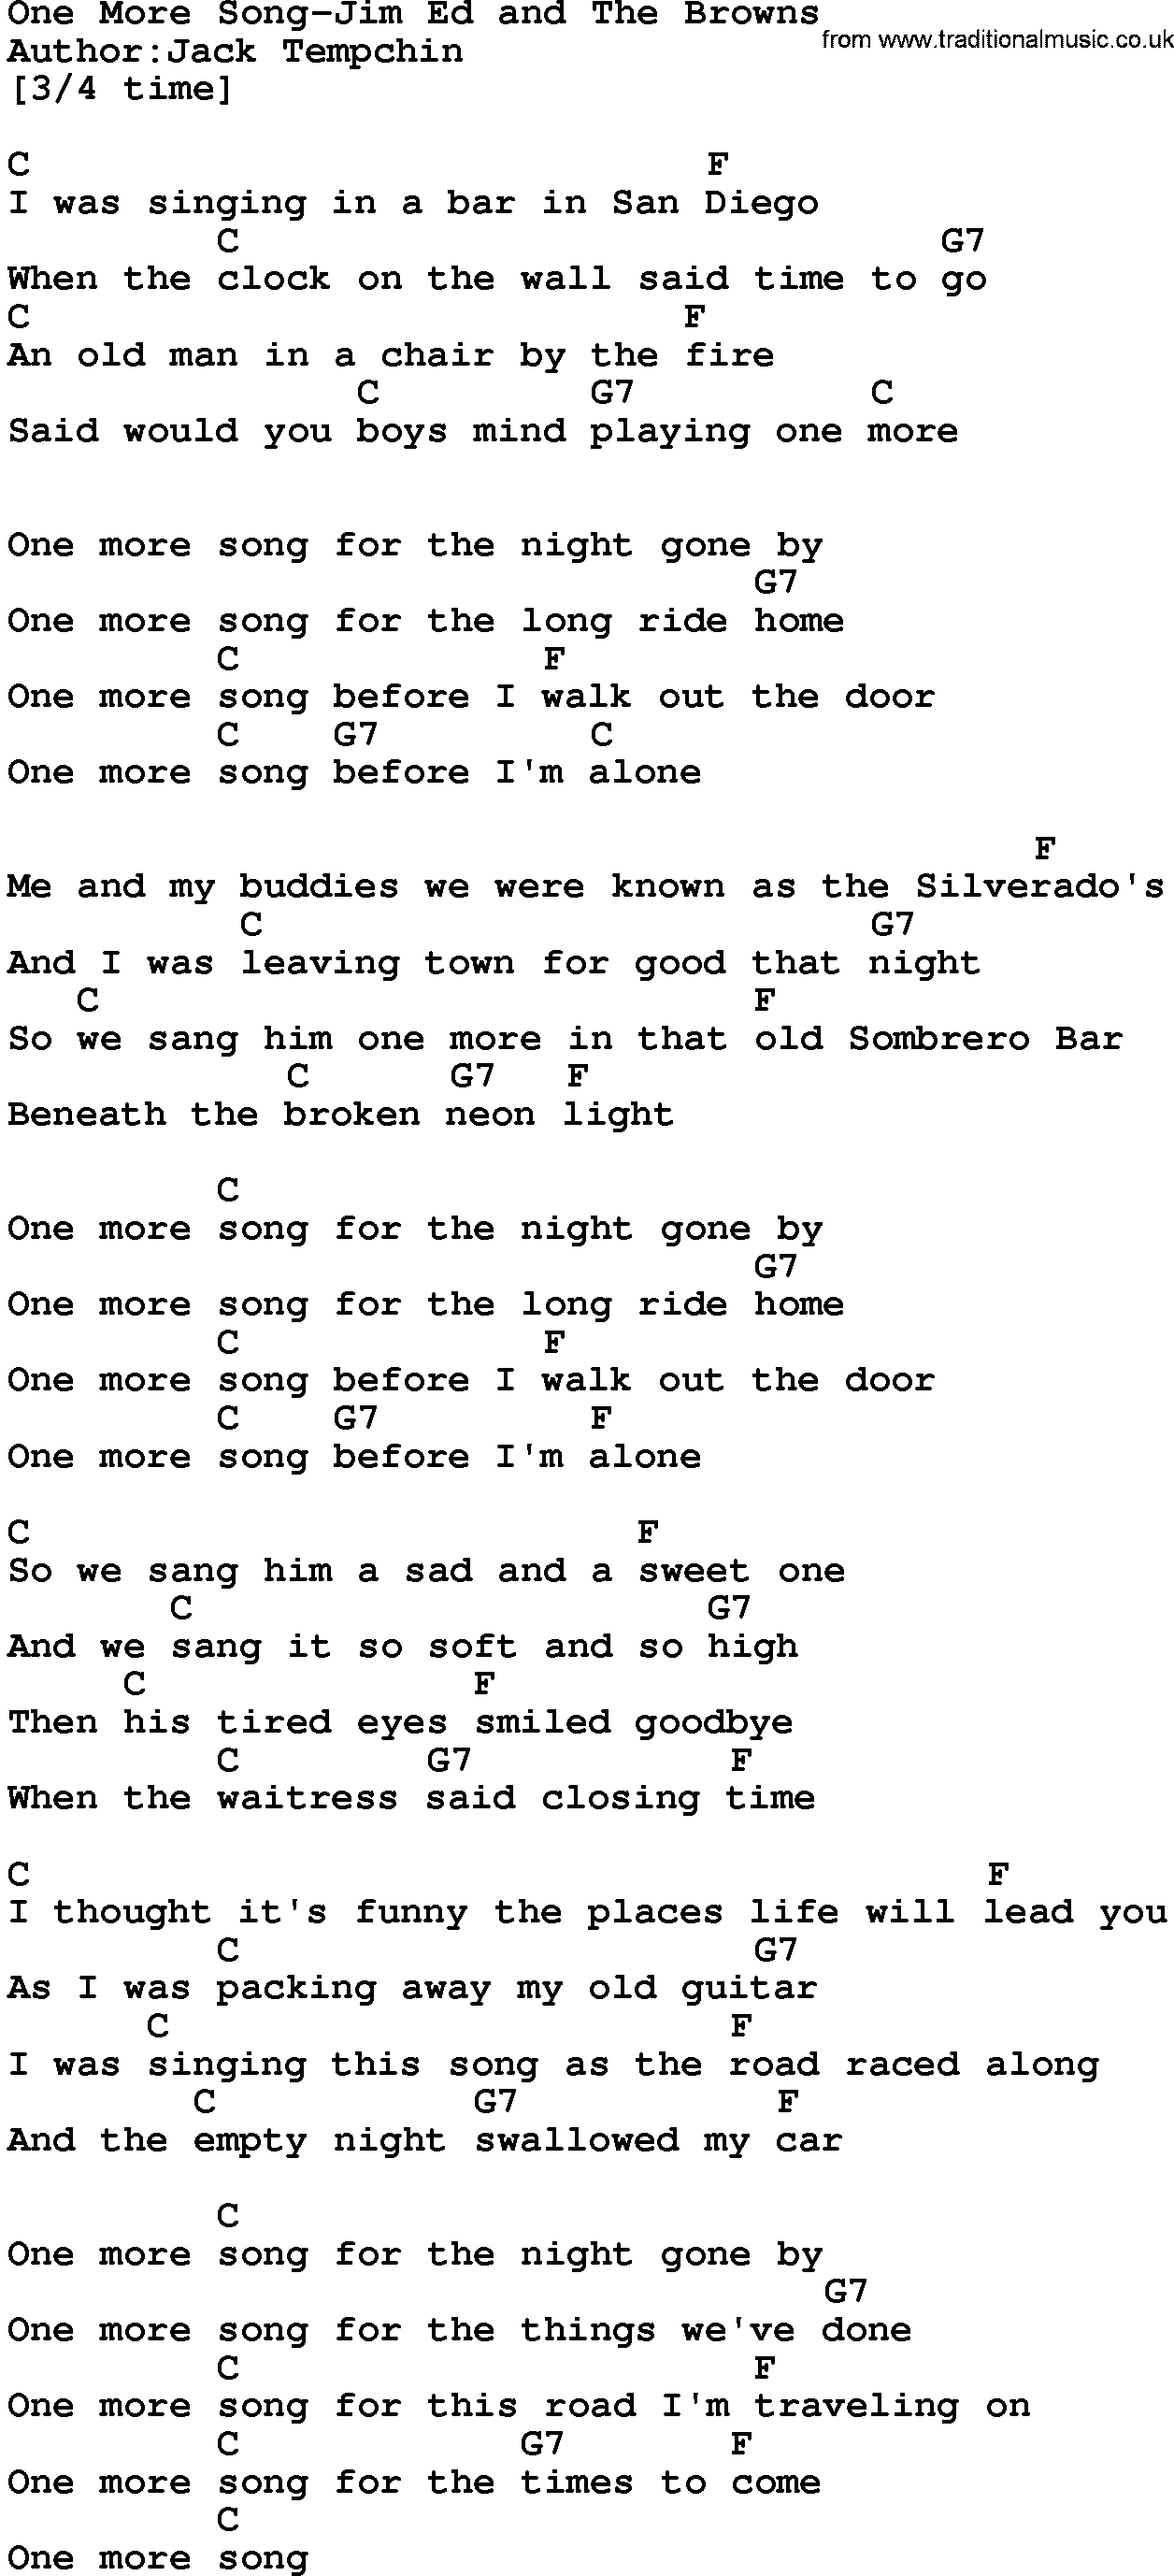 Country music song: One More Song-Jim Ed And The Browns lyrics and chords